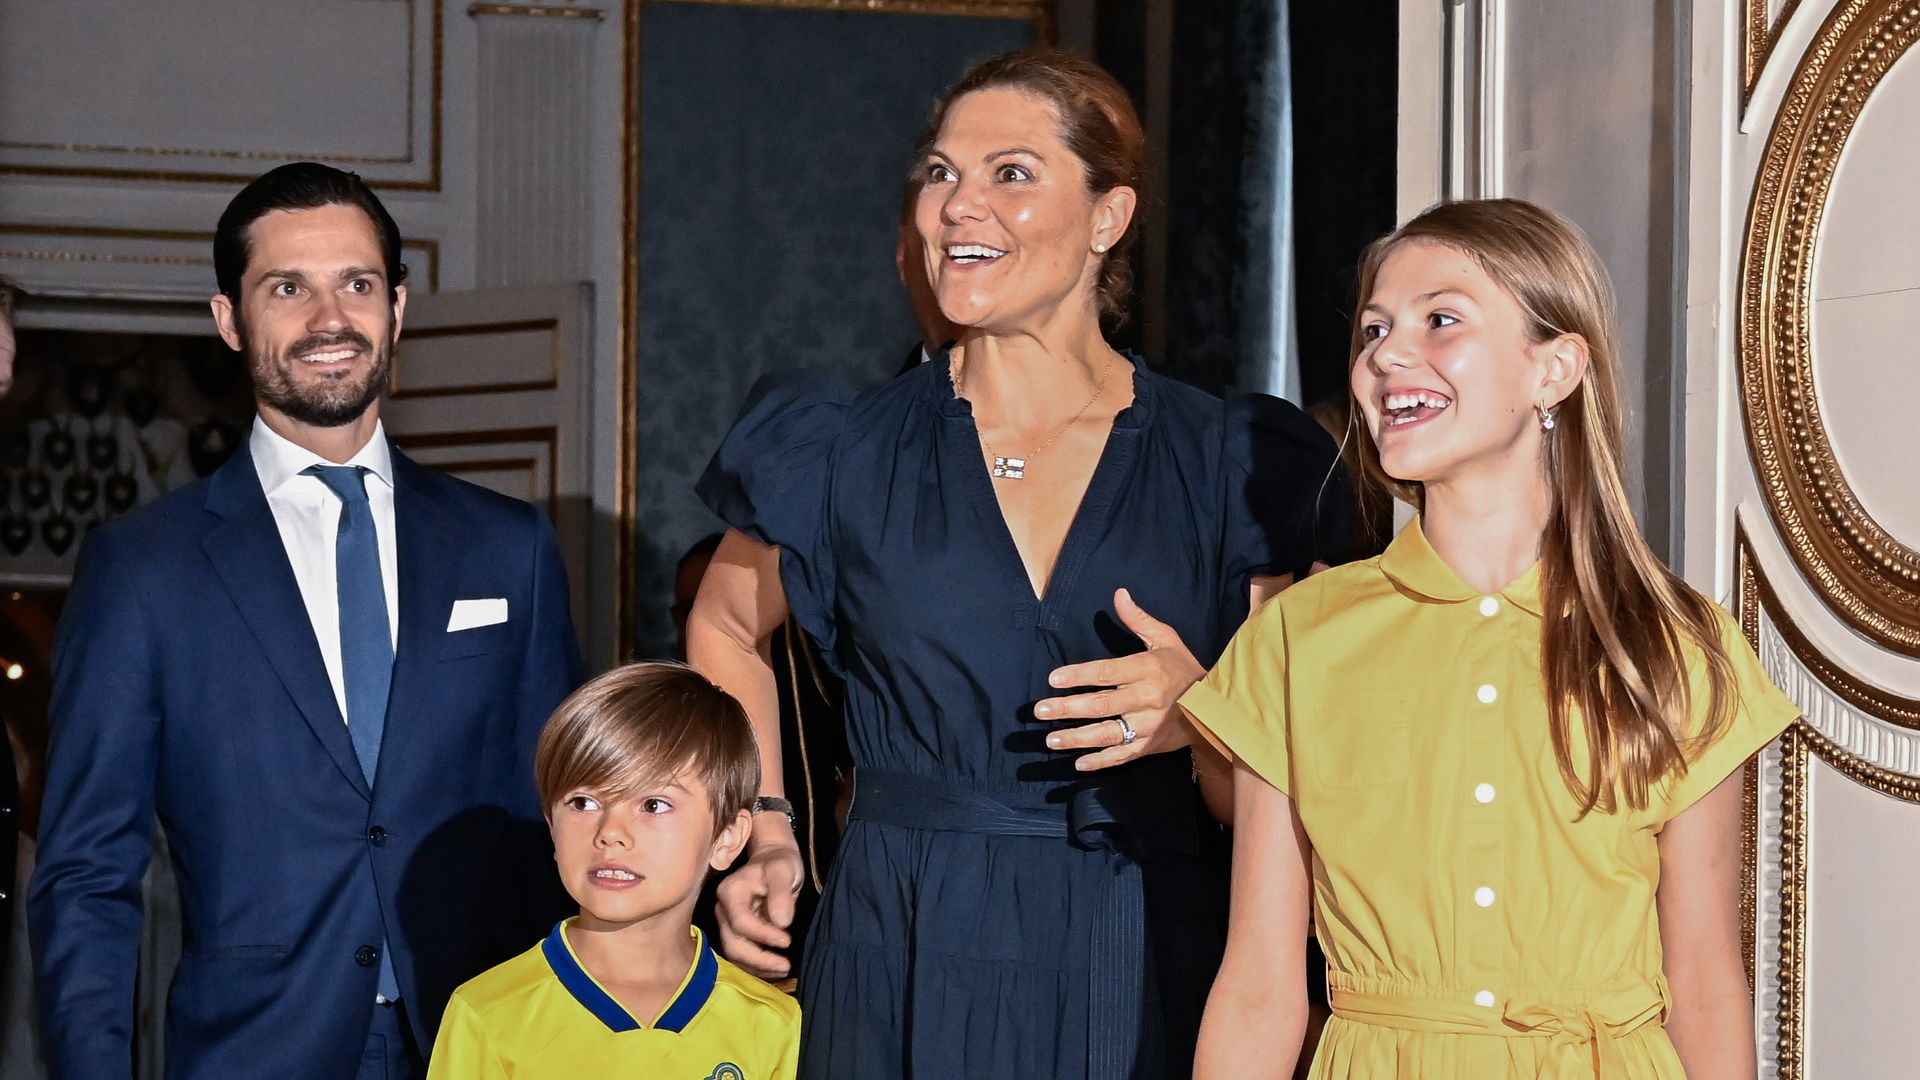 Crown Princess Victoria, Prince Carl Philip, Princess Estelle and Prince Oscar receive the World Cup bronze medalists in football at the Royal Palace in Stockholm, Sweden 